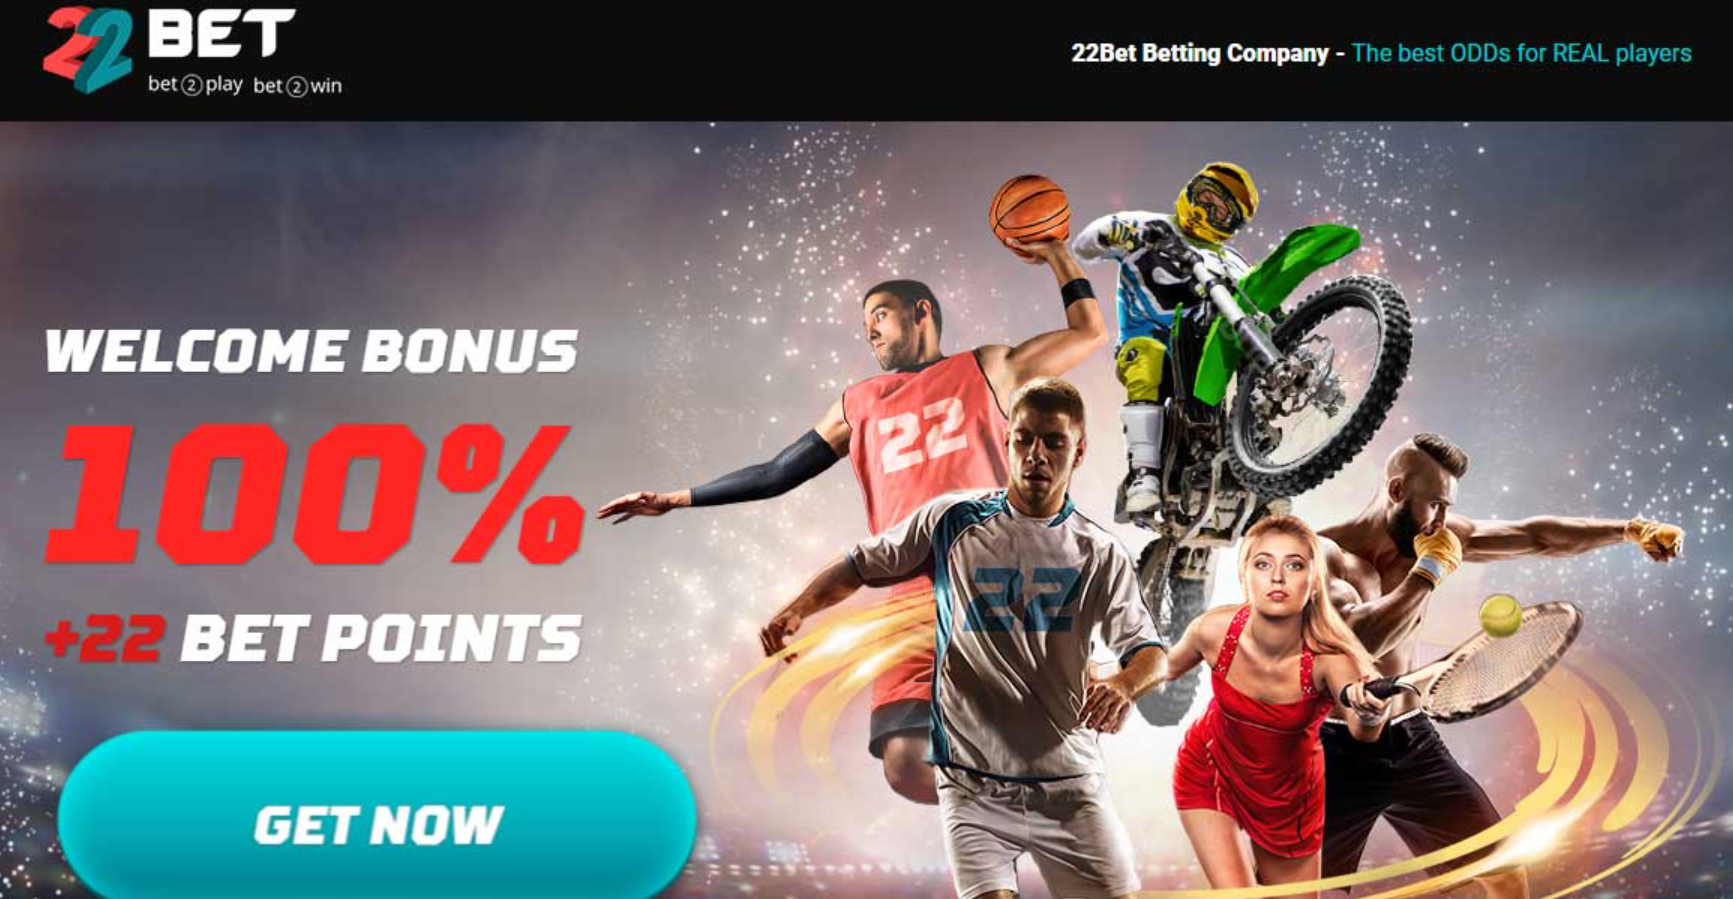 What besides deposit bonus is the company 22Bet famous for?